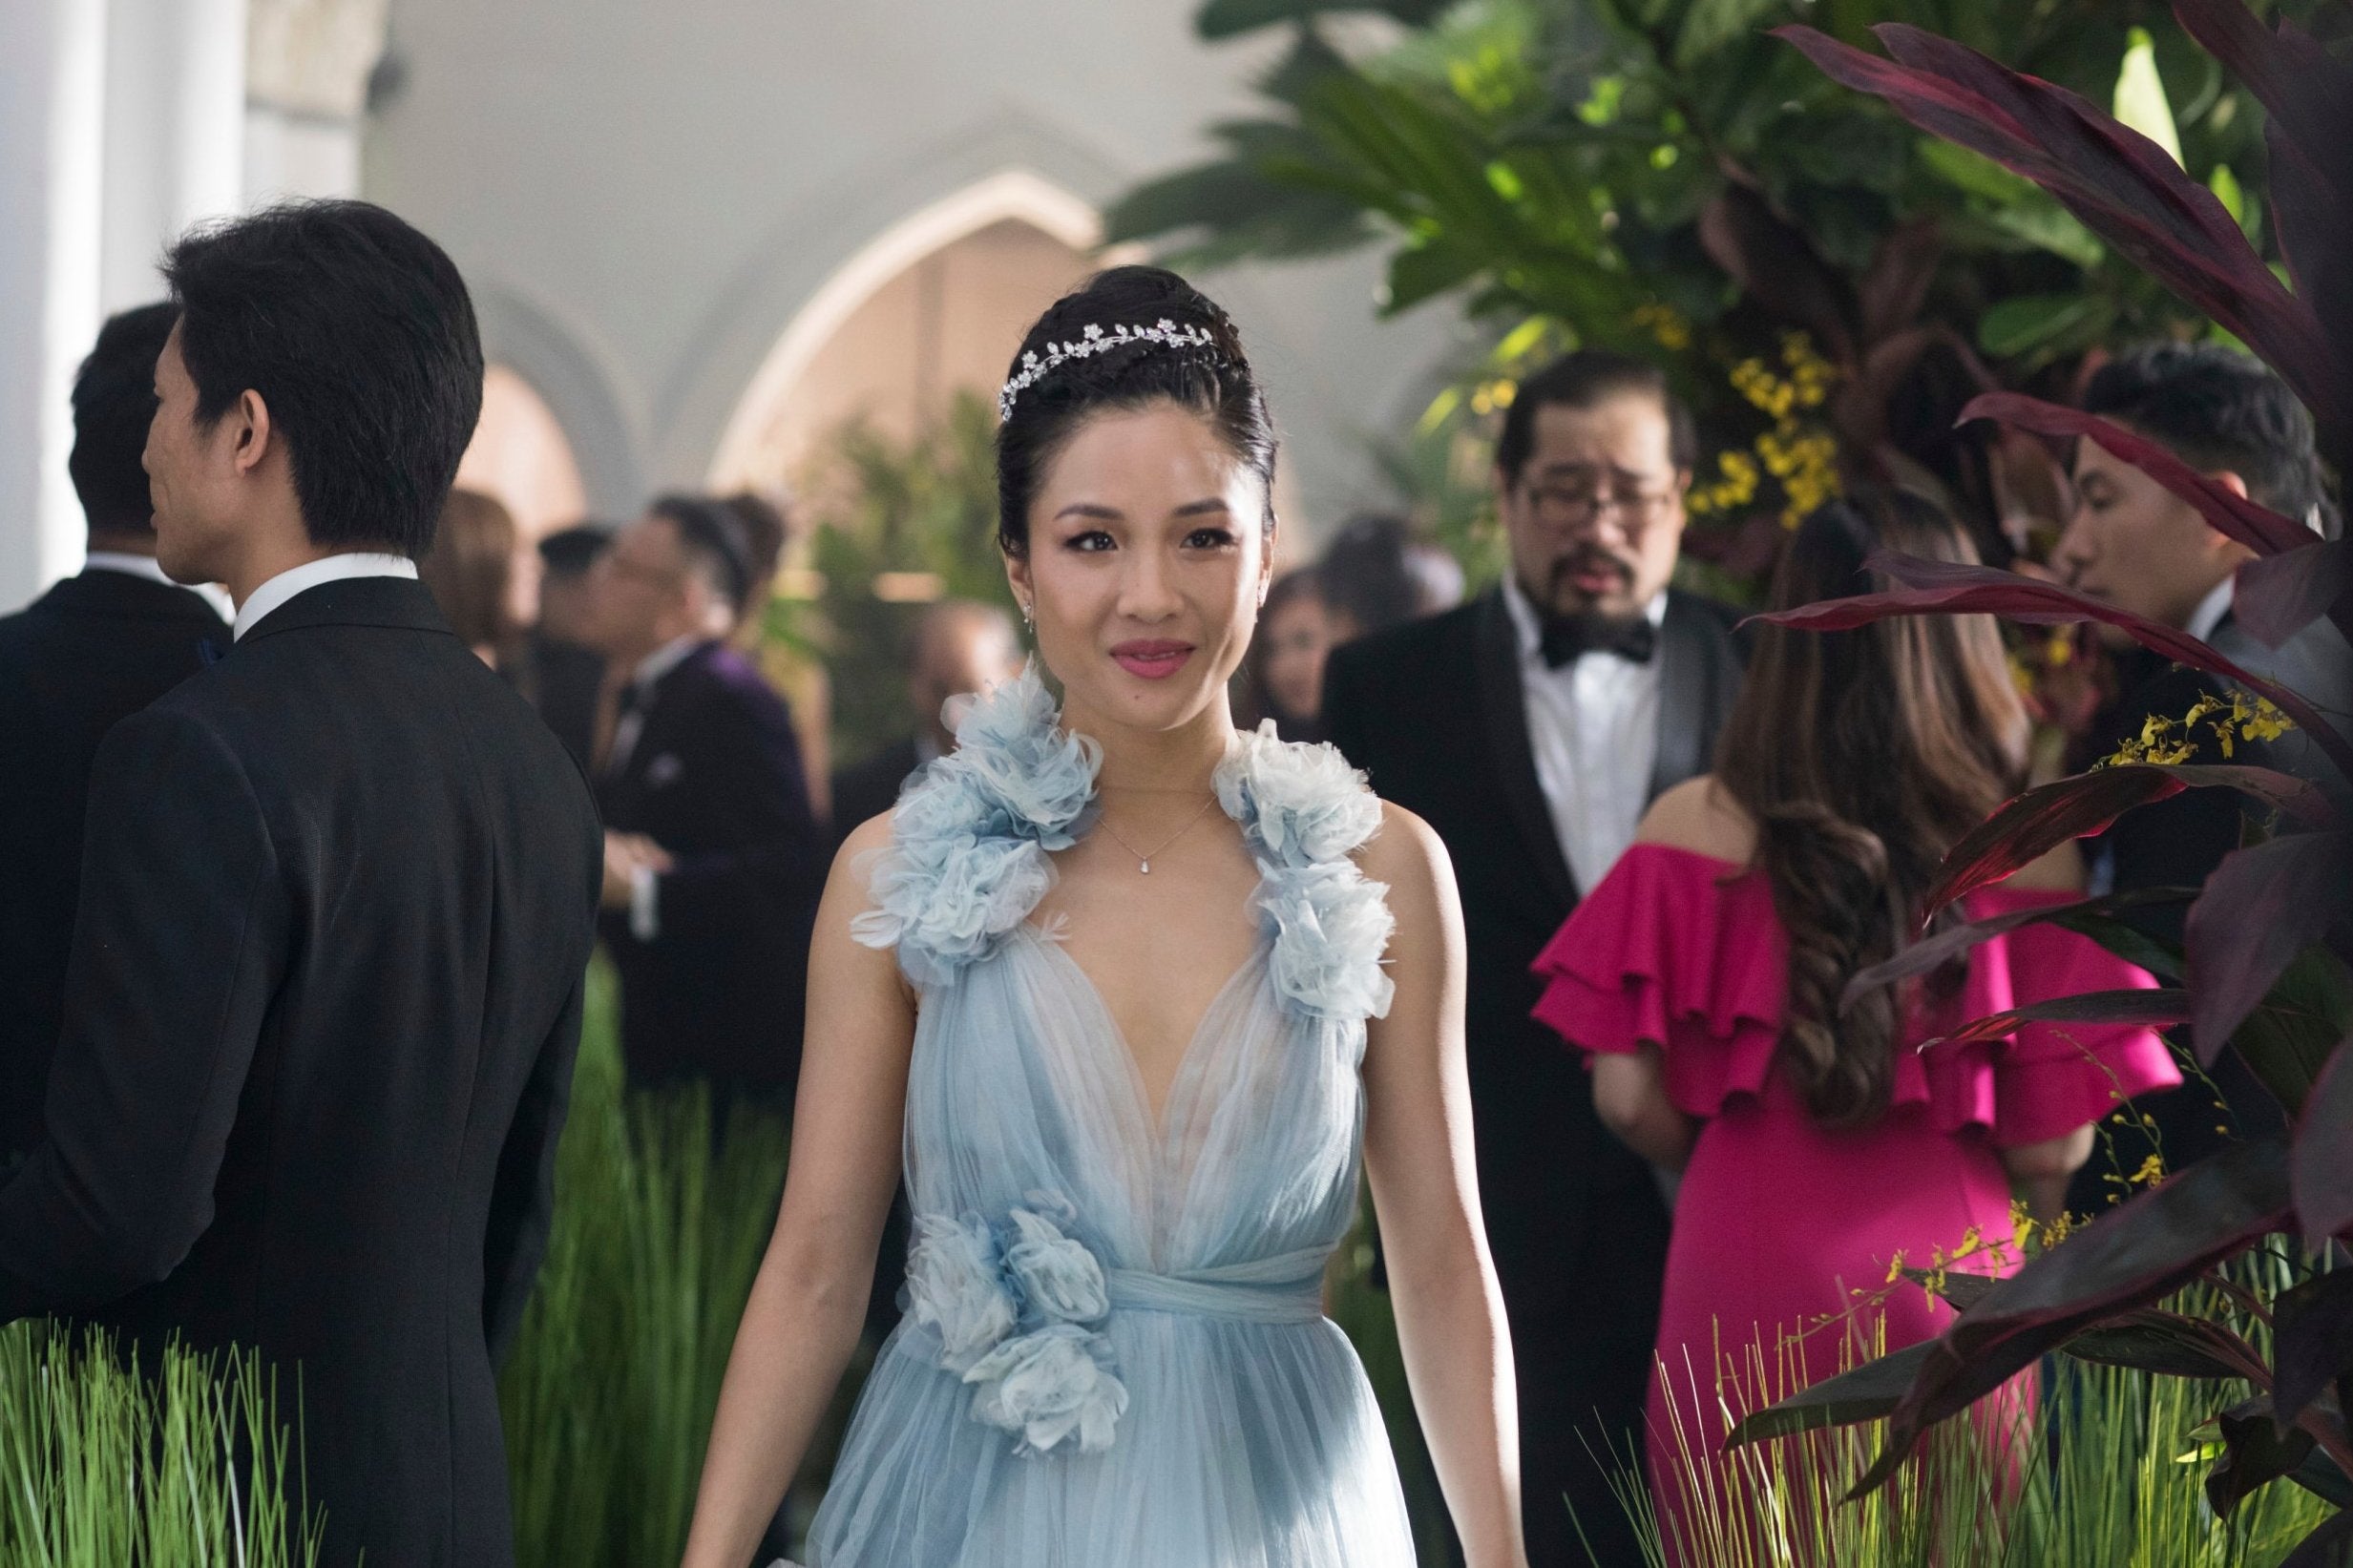 Constance Wu received critical acclaim for her starring role as Rachel Chu